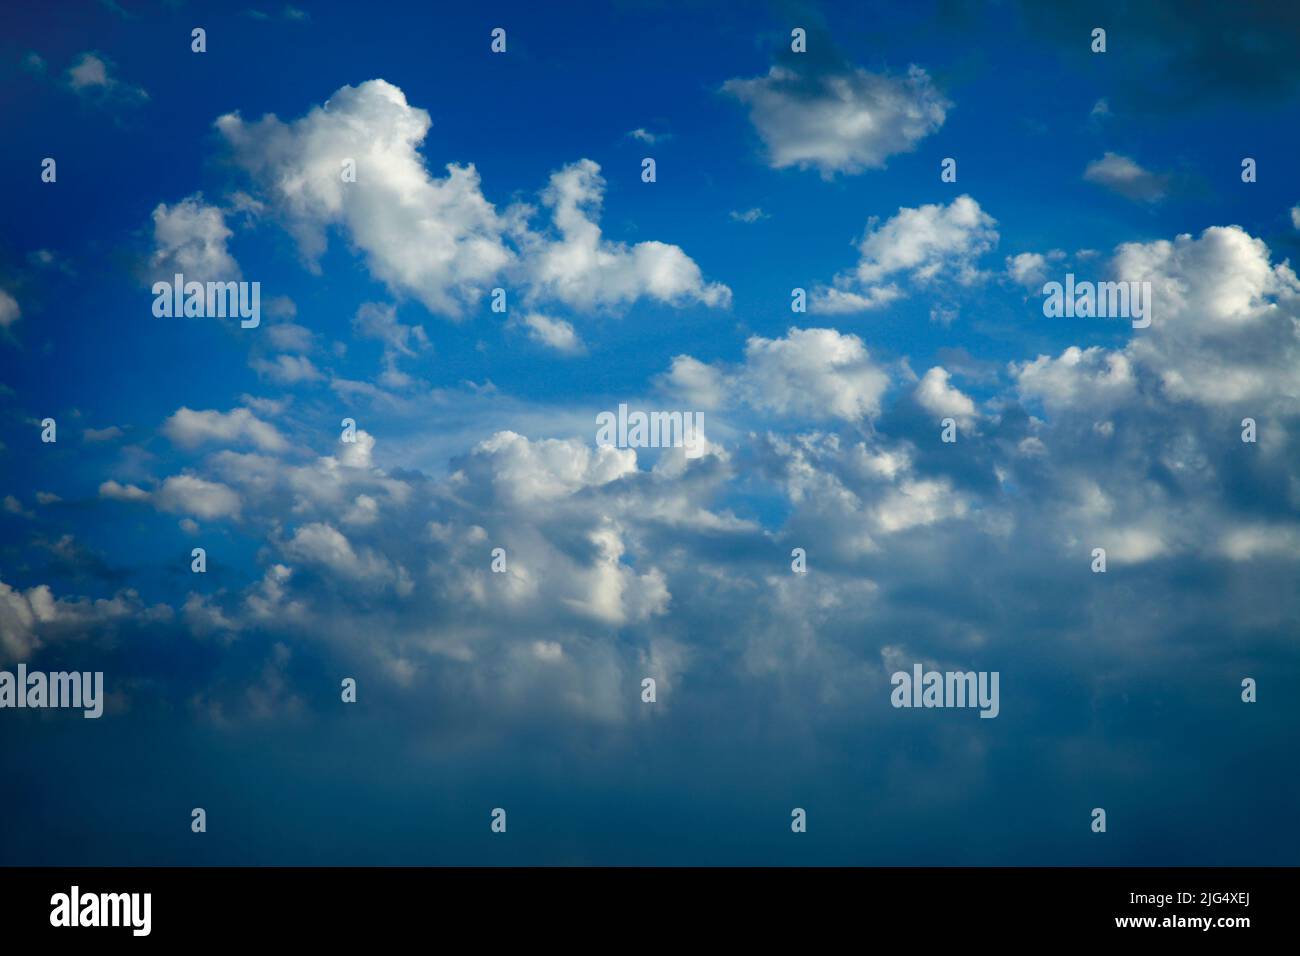 CLEAN AIR CONCEPT: Blue sky with fluffy clouds Stock Photo